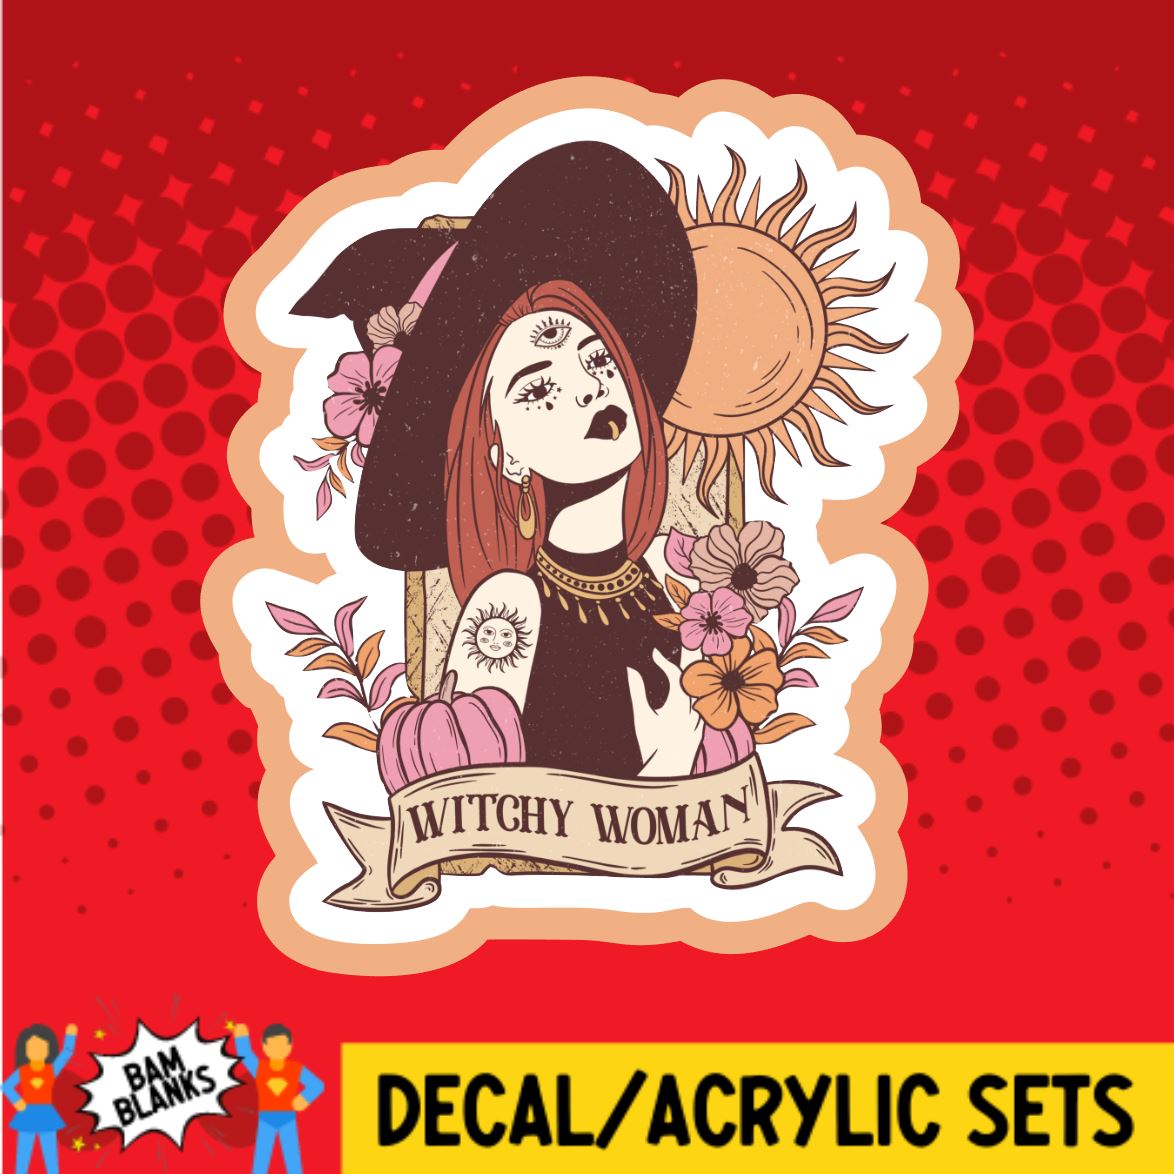 Witchy Woman - DECAL AND ACRYLIC SHAPE #DA01307